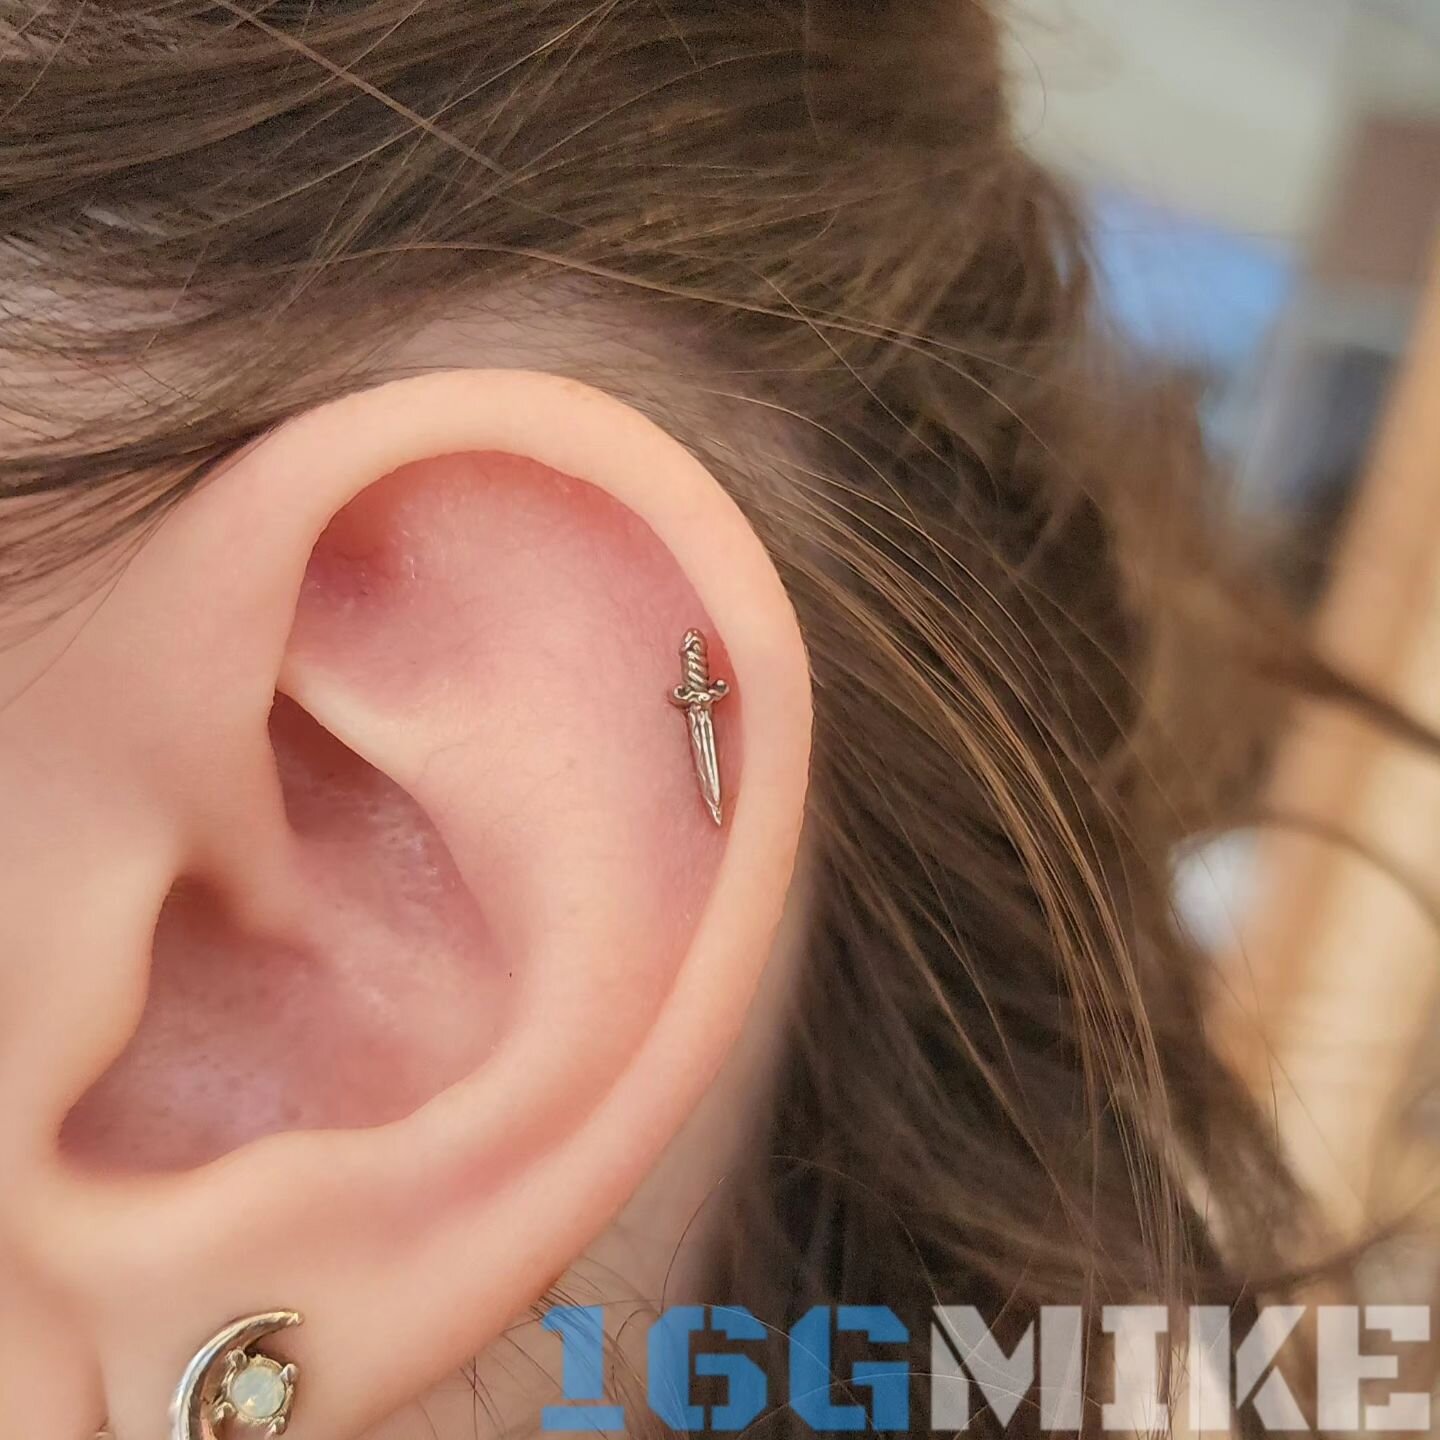 Healed helix with 18kw dagger from @anatometalinc